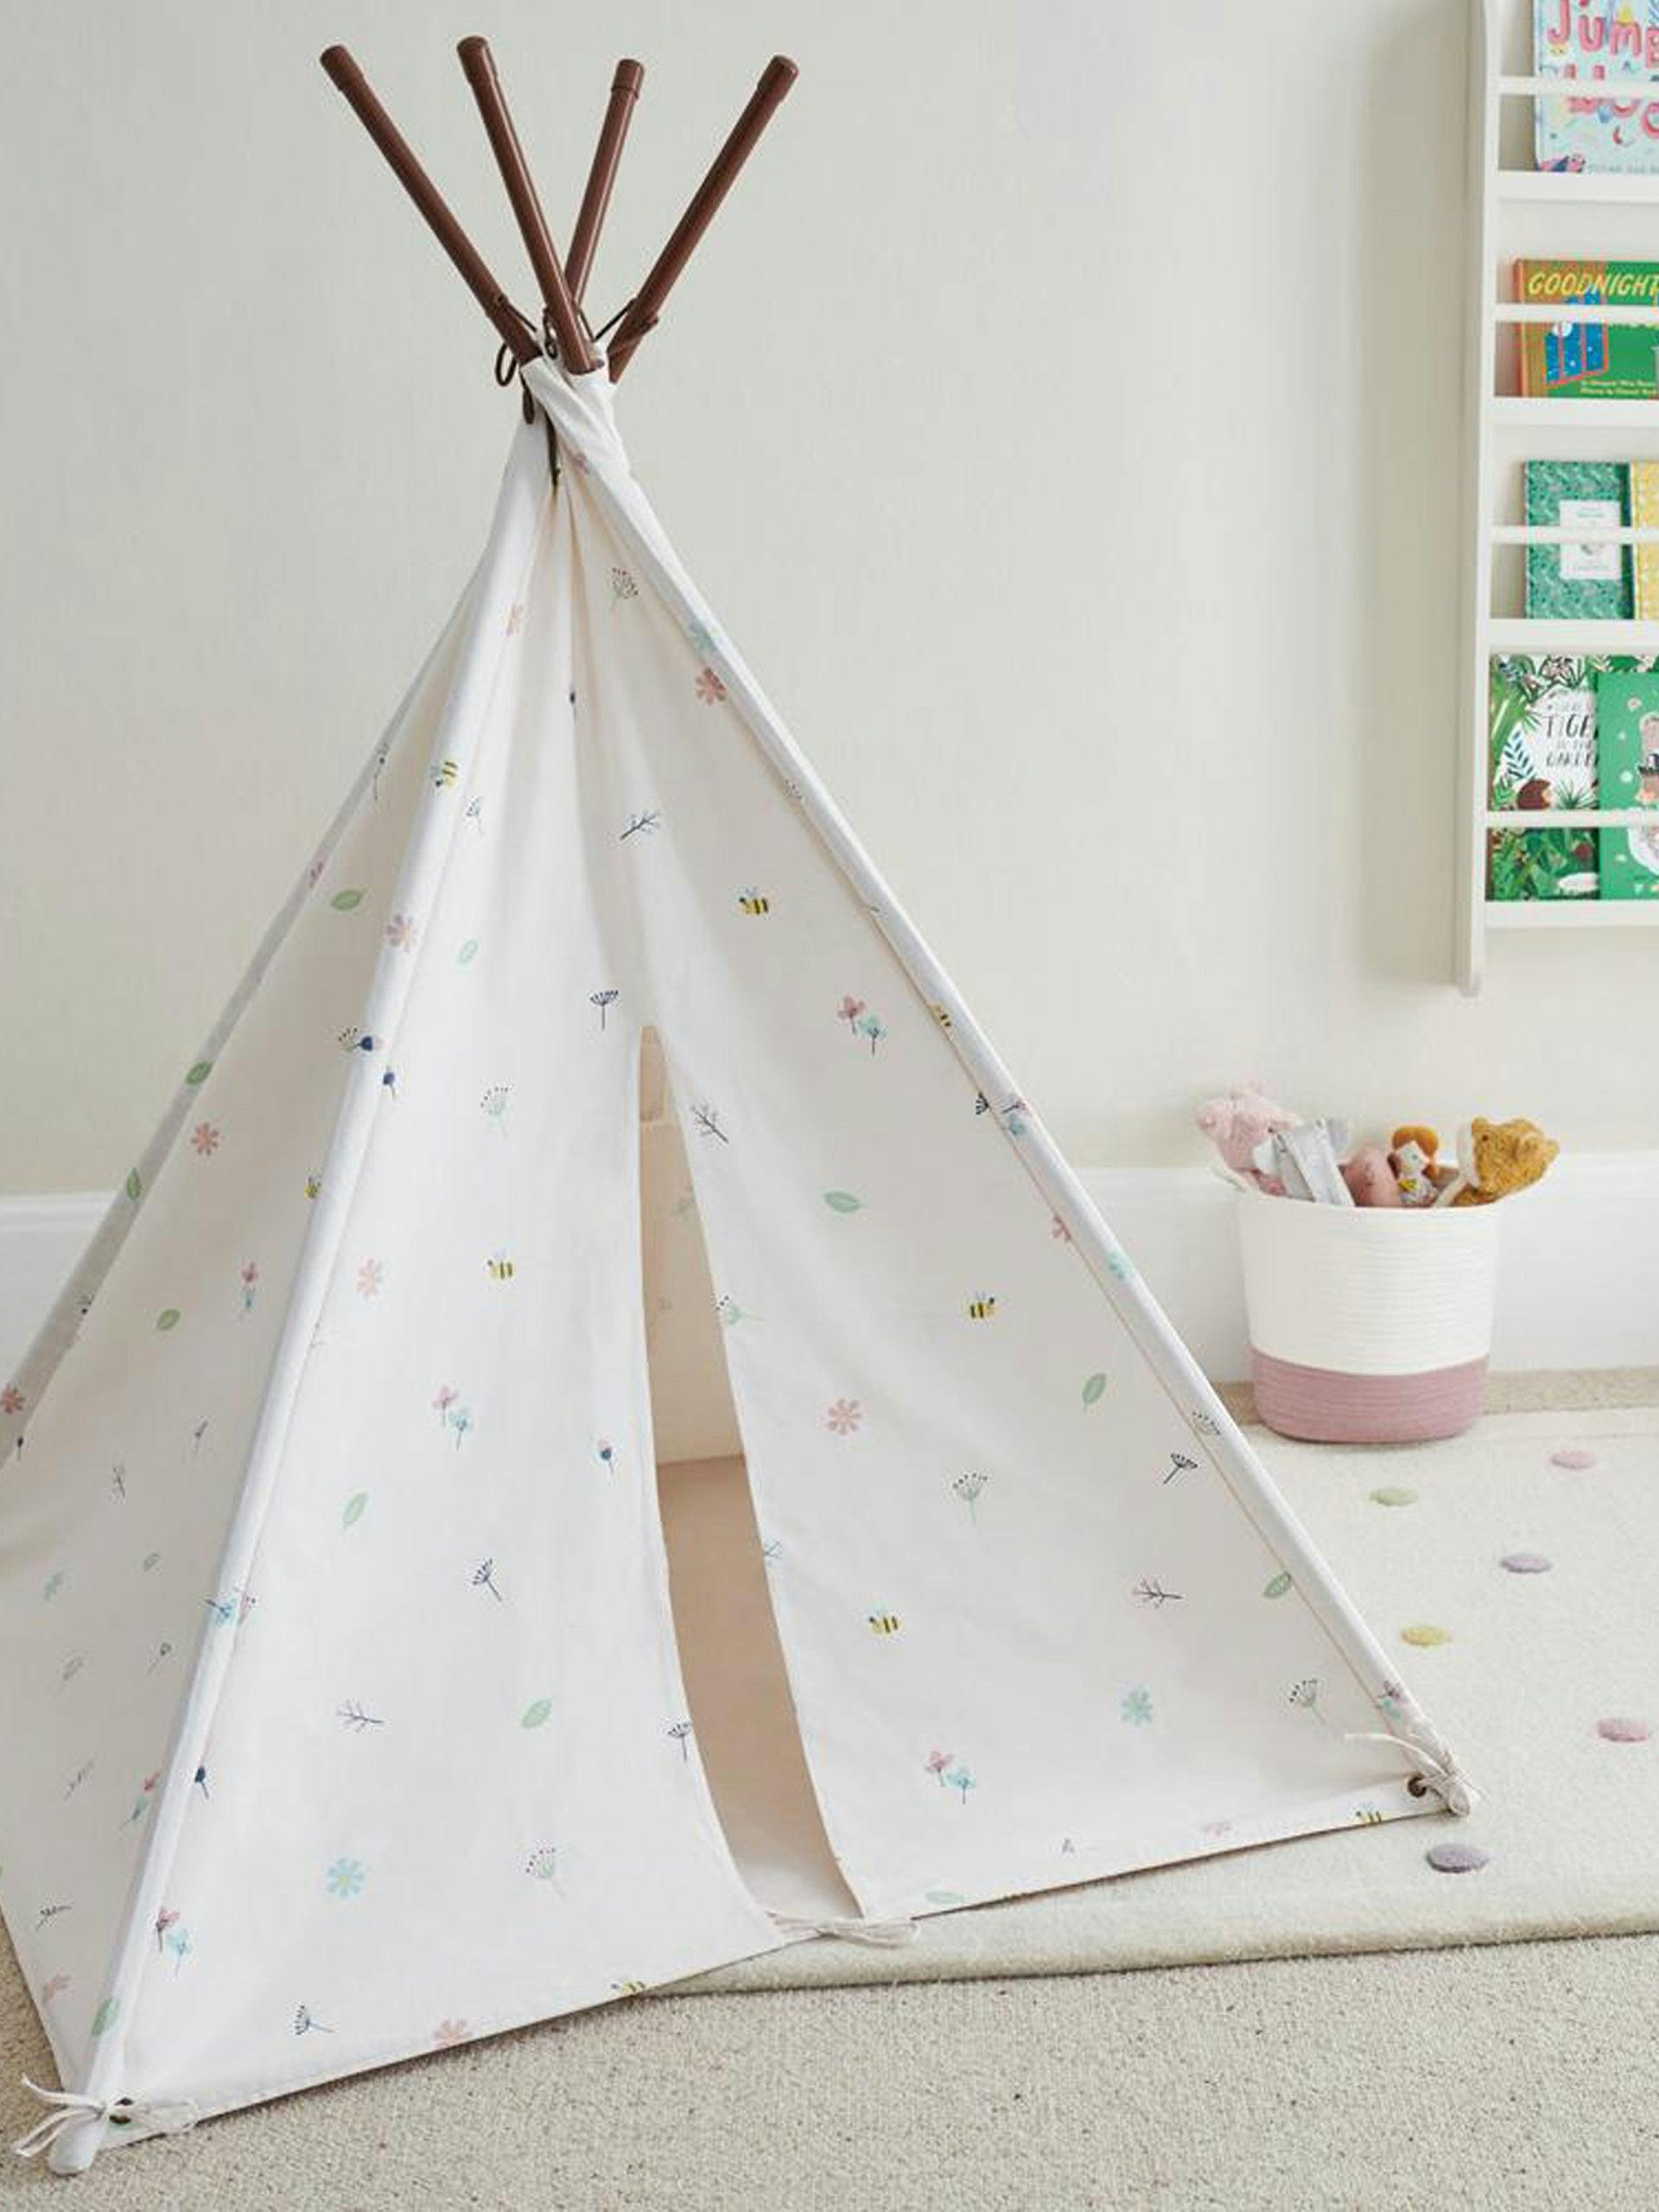 White floral print teepee tent